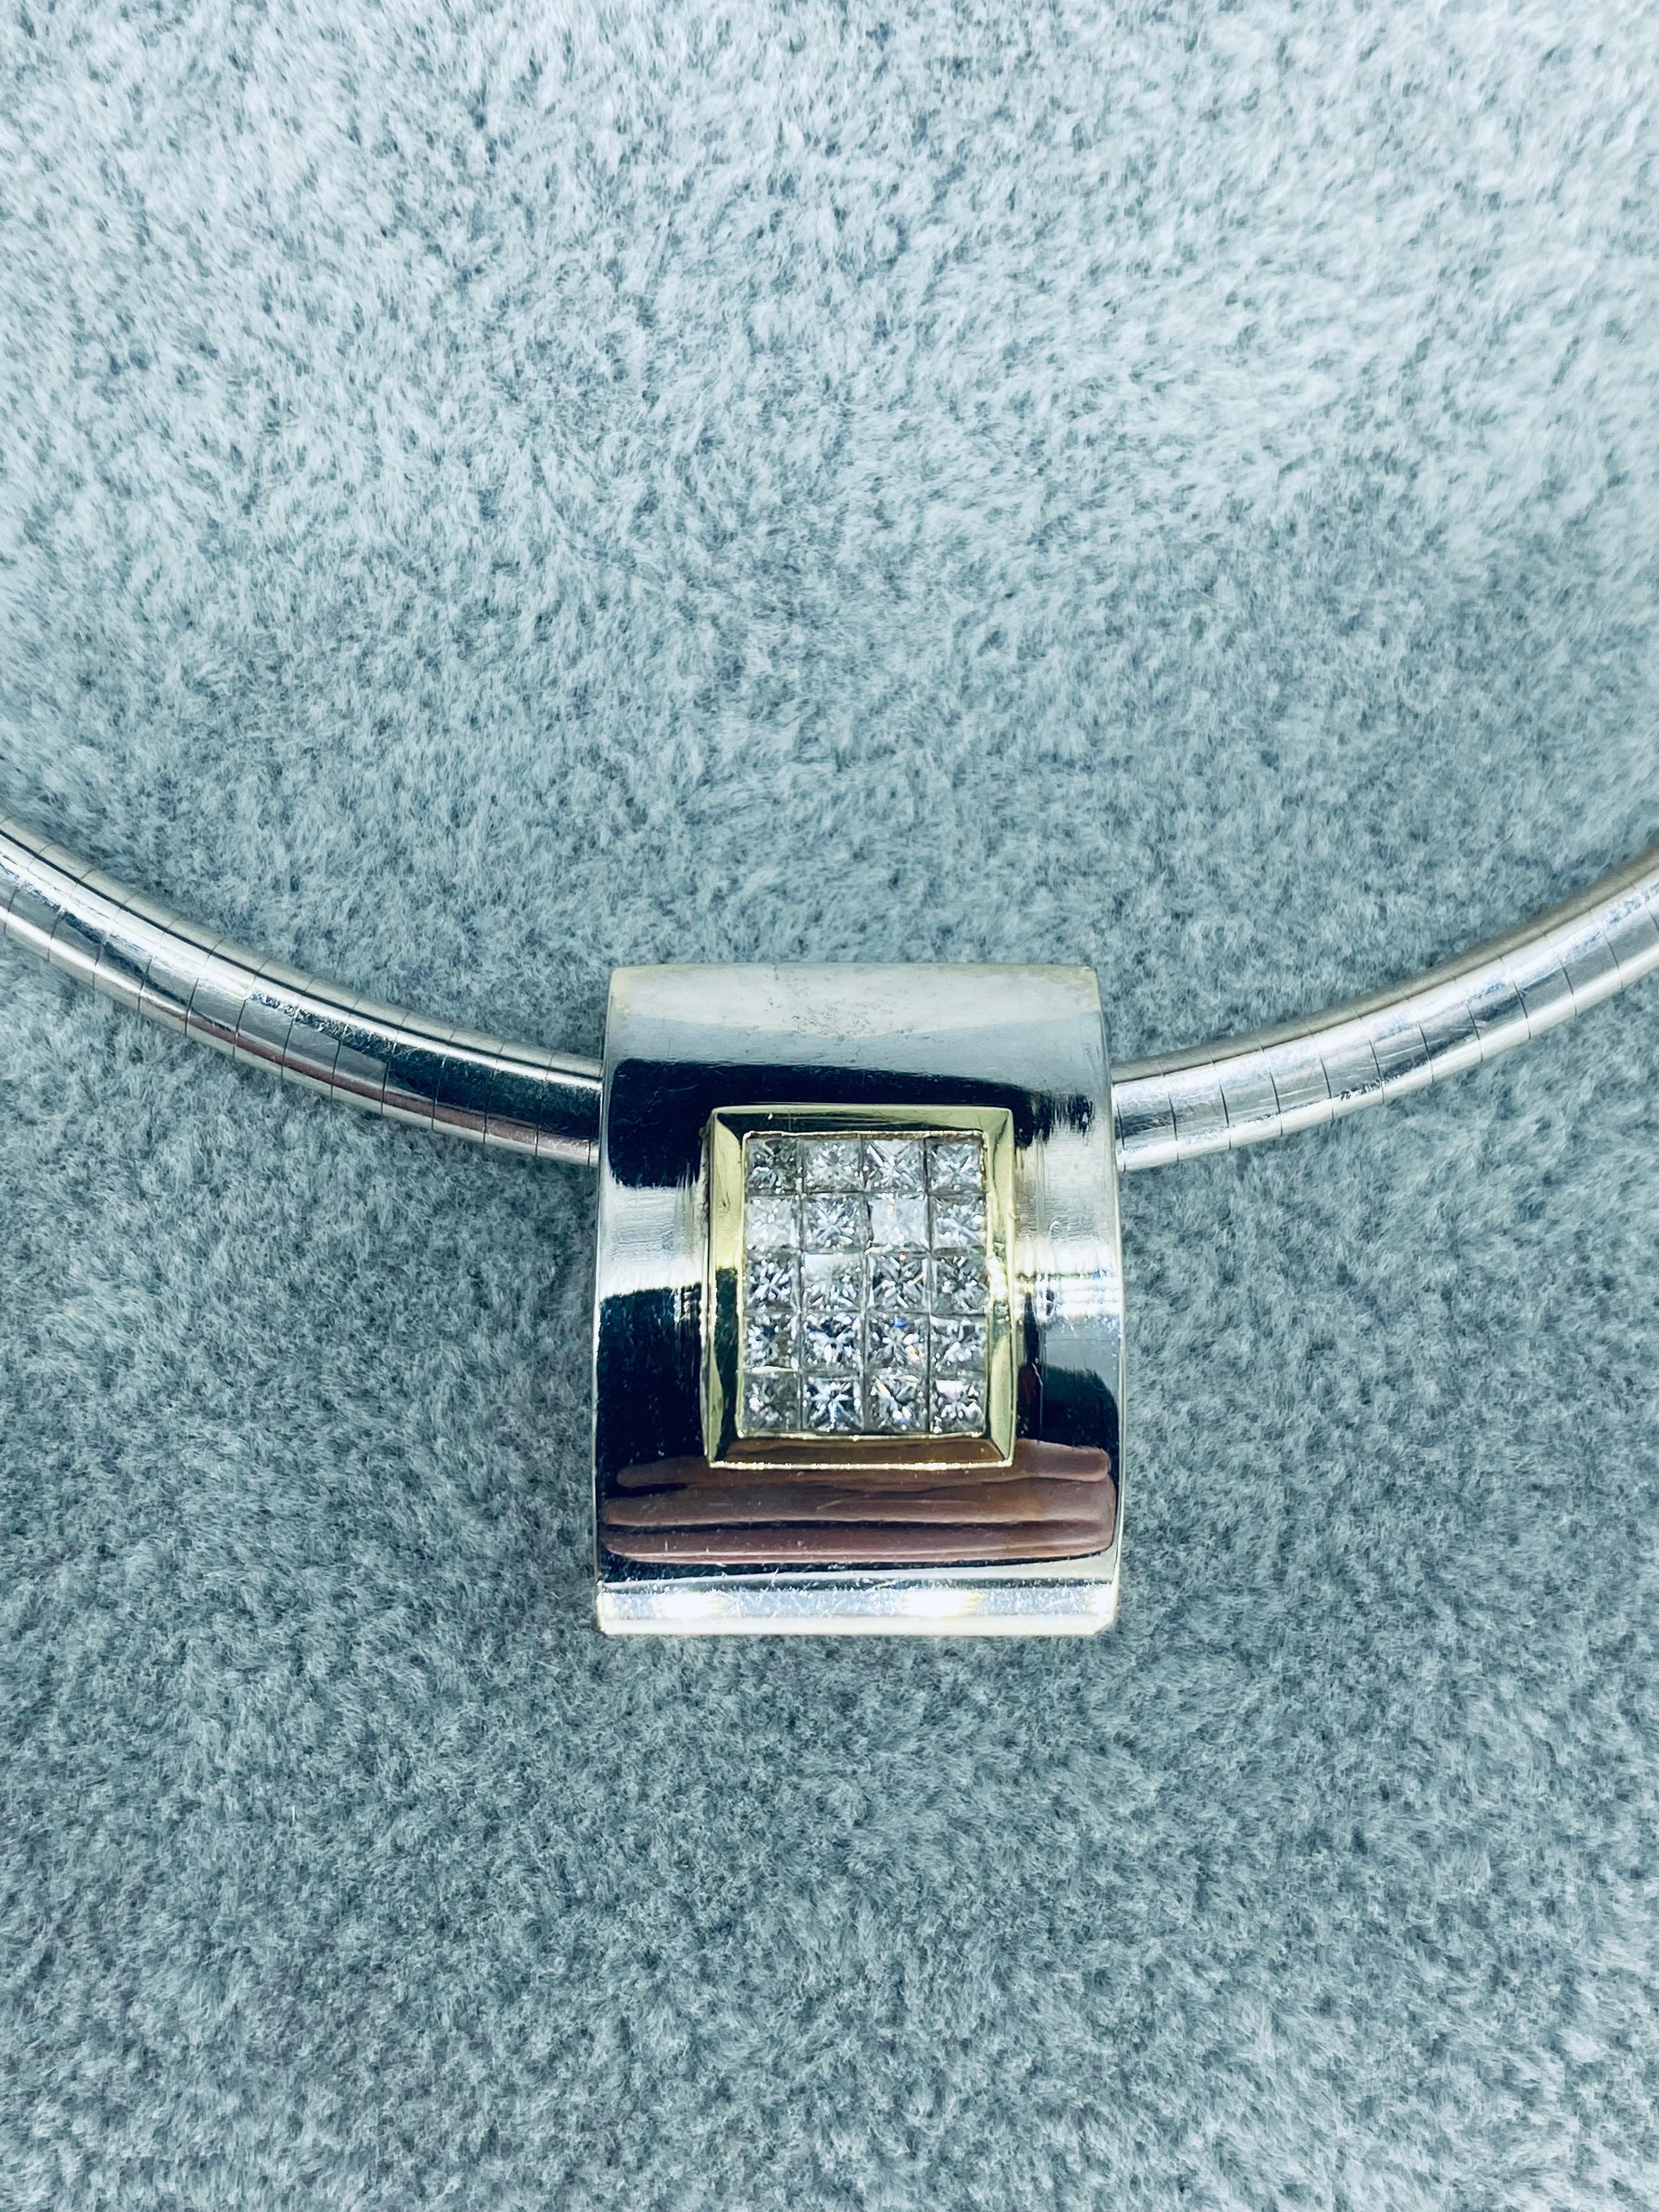 Vintage 2.03 Carat Diamonds Pendant With RARE Omega 17 Inch Chain 18k White Gold.
There are approx 20 princess cut diamonds in the pendant crafted in white gold with a yellow gold frame around the diamonds in 18k gold. The chain is heavy weighting